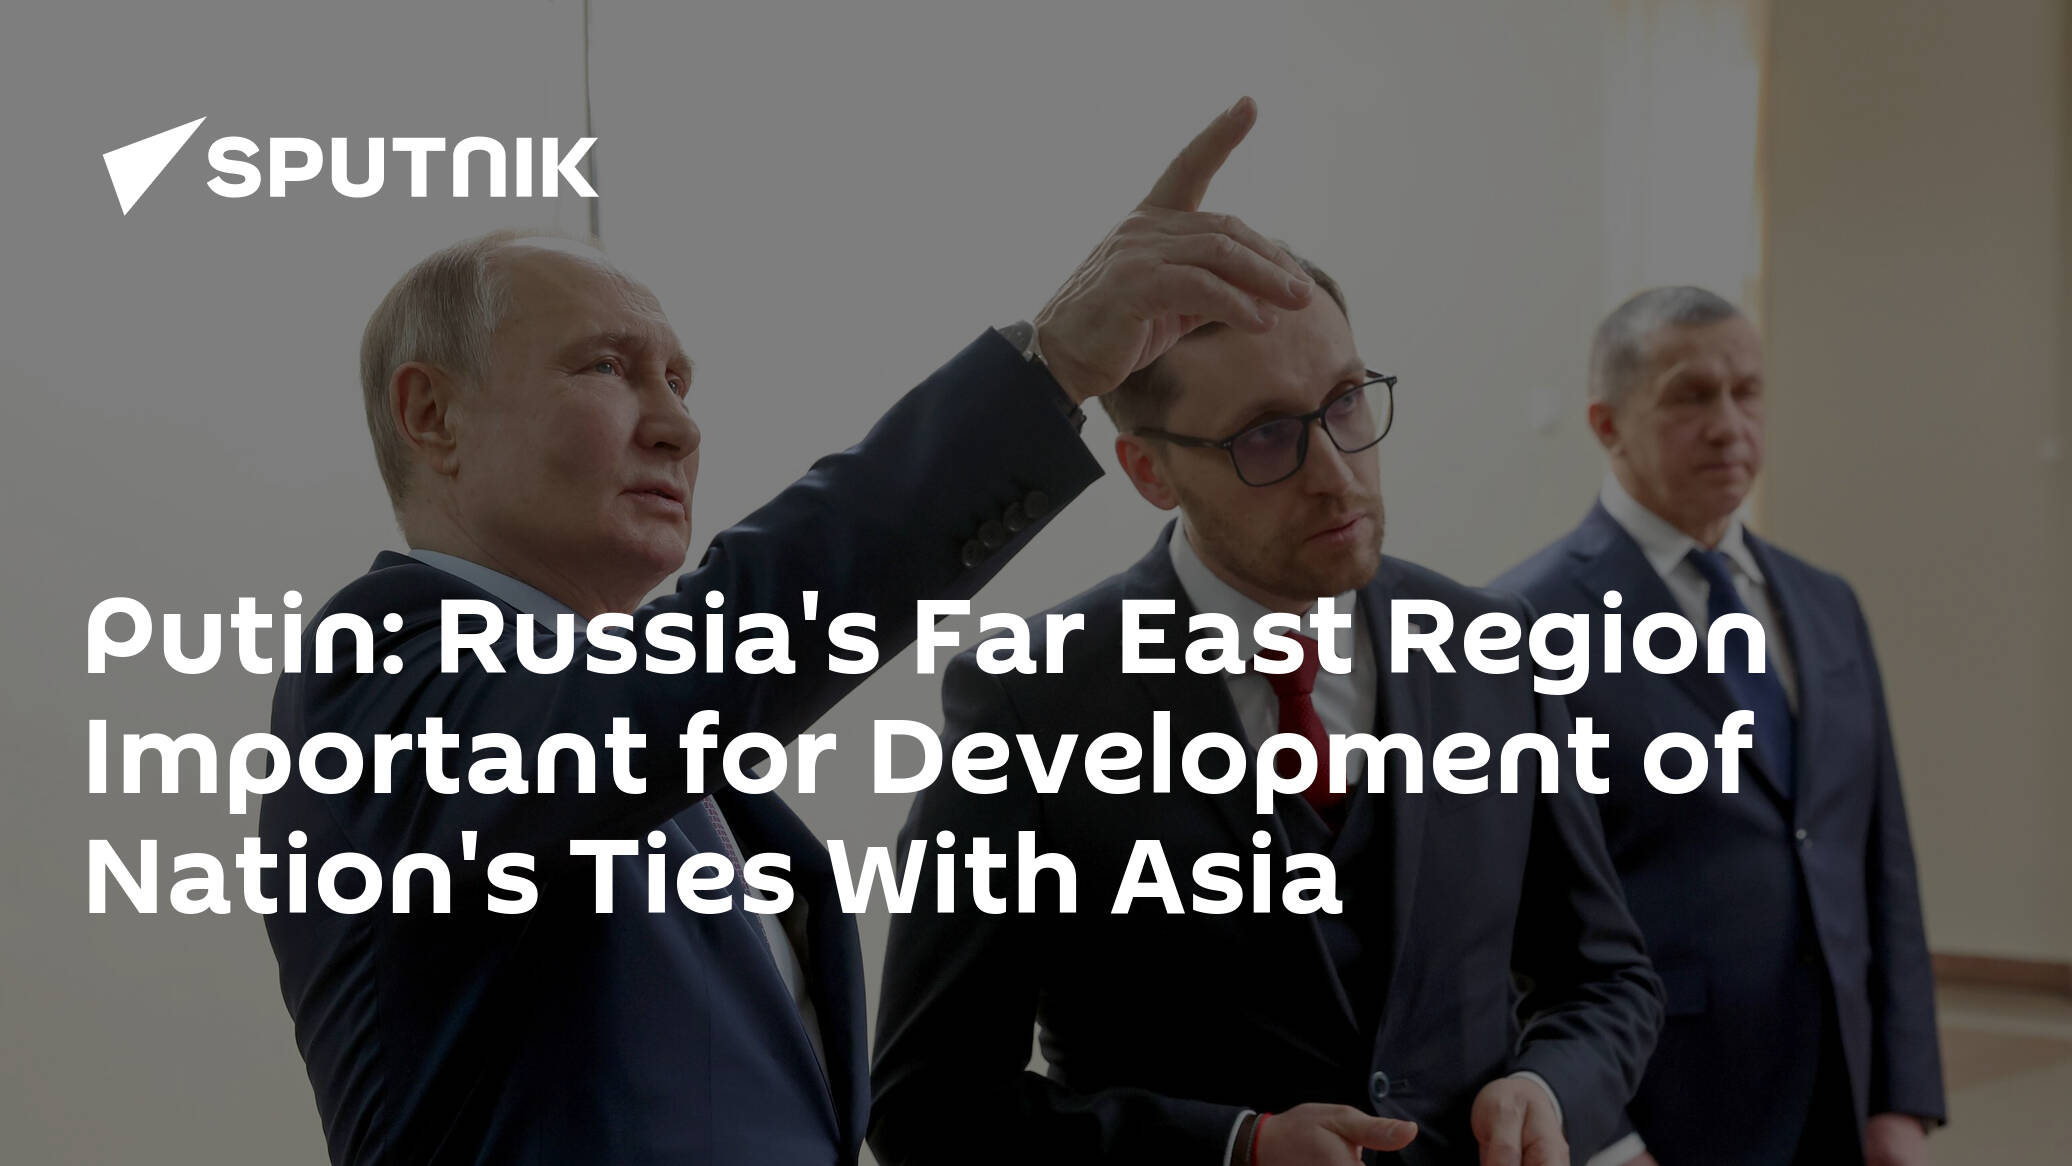 Putin: Russia's Far East Region Important for Development of Nation's Ties With Asia